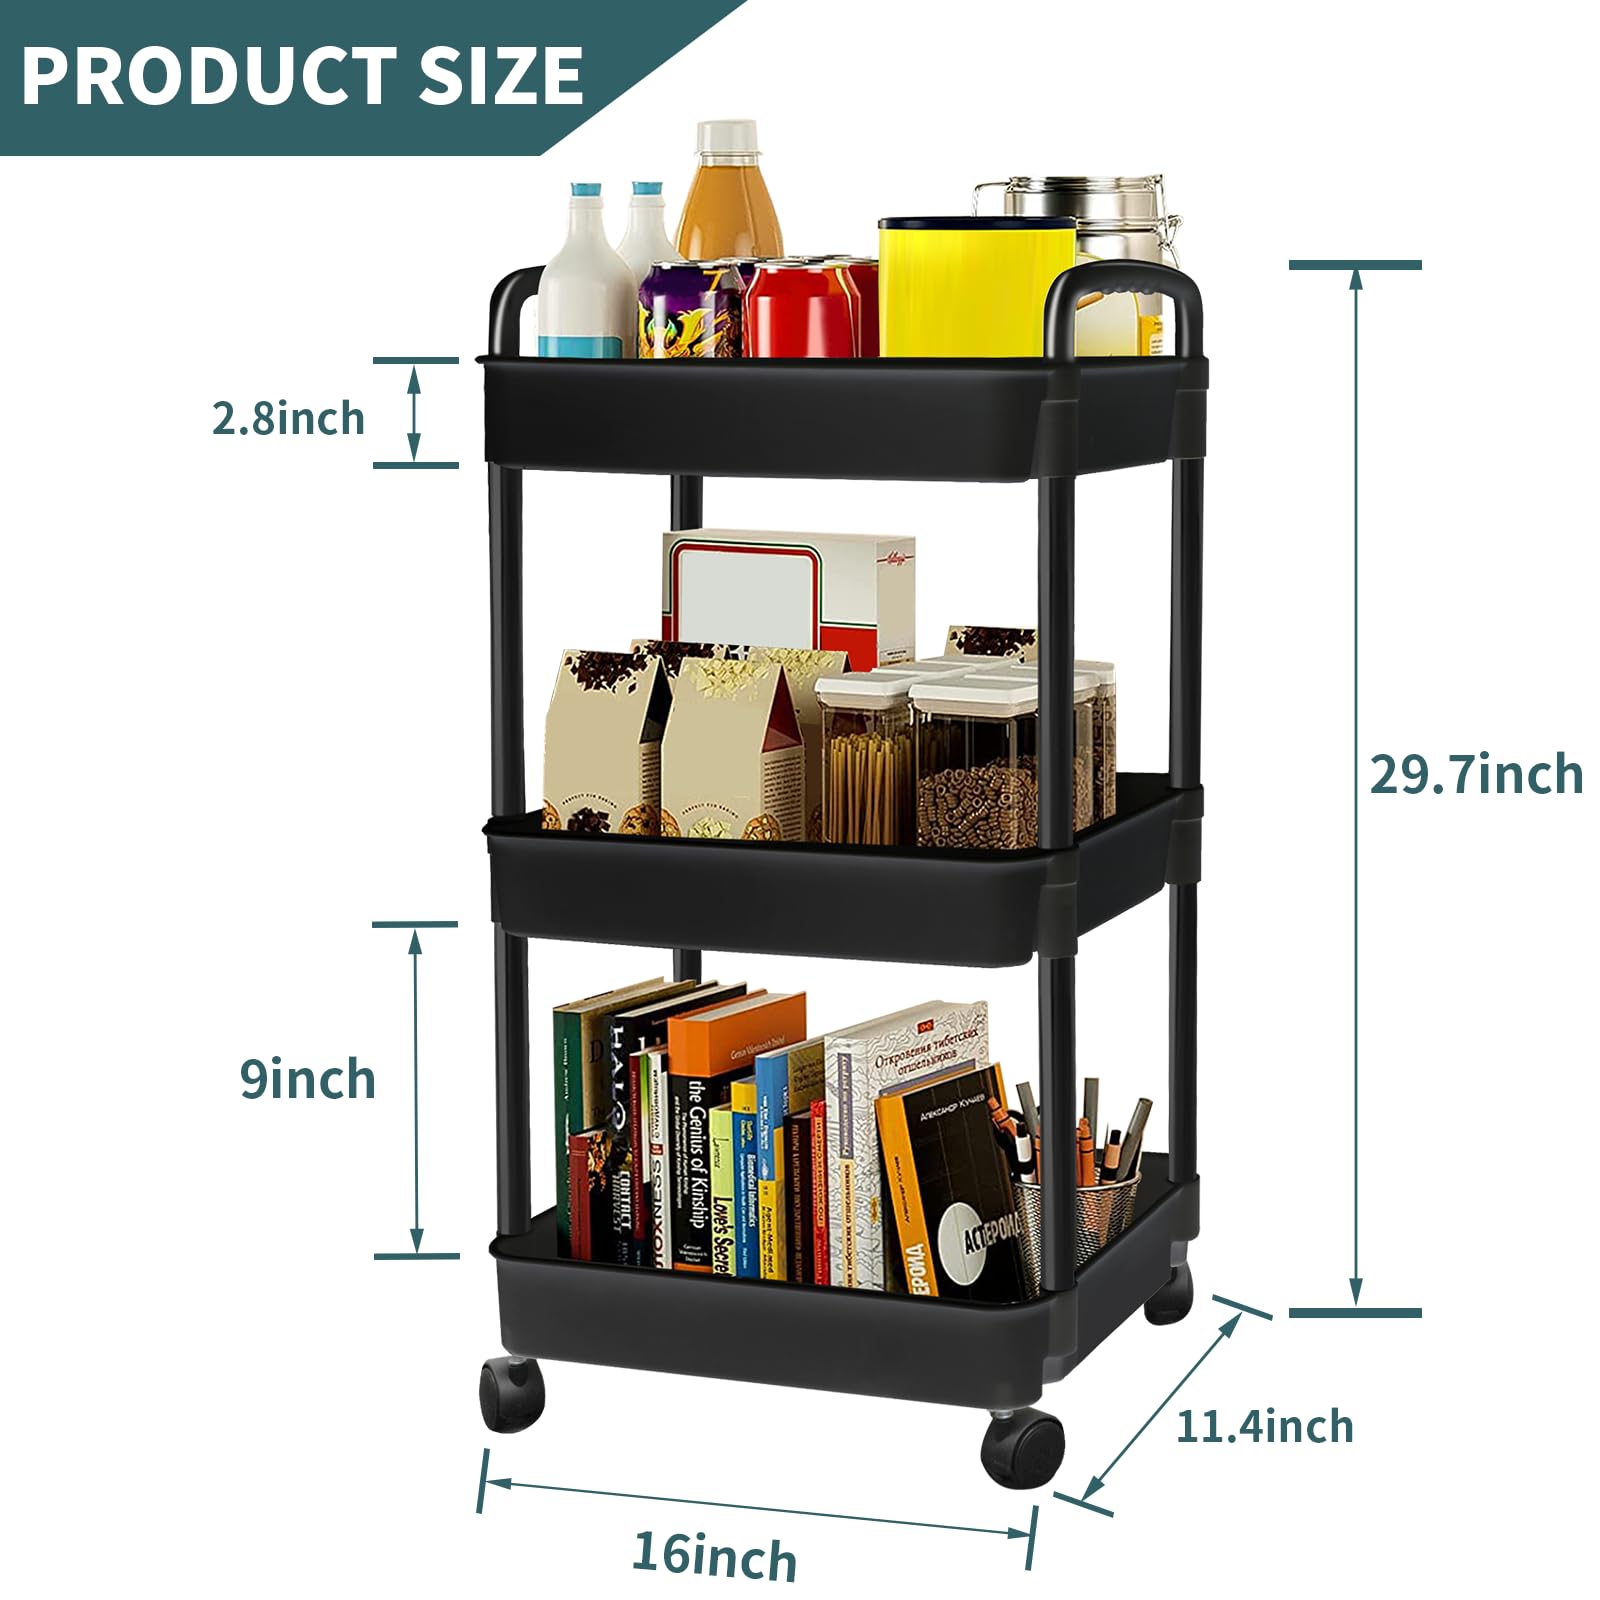 EZ Cozy 3 Tier Rolling Cart, Plastic Rolling Utility Cart with Wheels, Laundry Room Organization, Rolling Storage Cart Organizer, Easy Assemble Bathroom Organizer for Kitchen, Room, Office (Black)